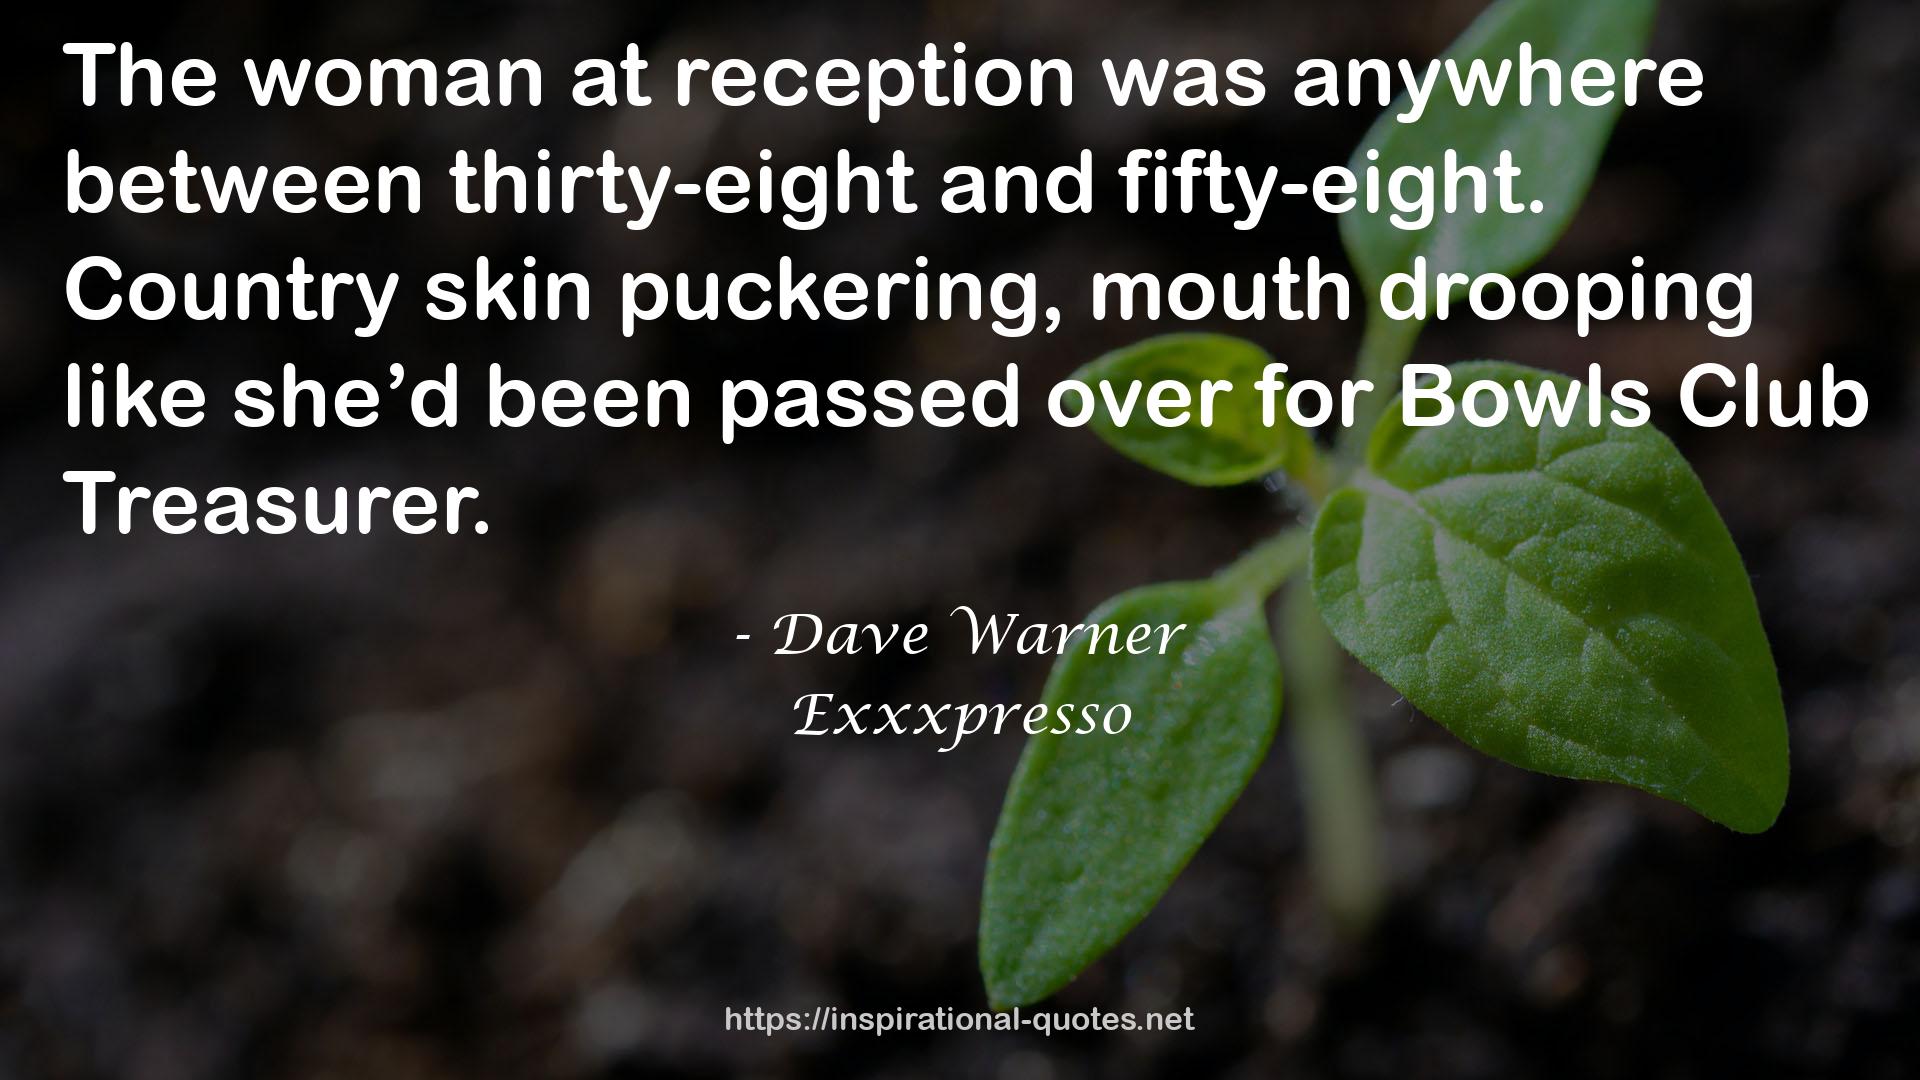 Dave Warner QUOTES